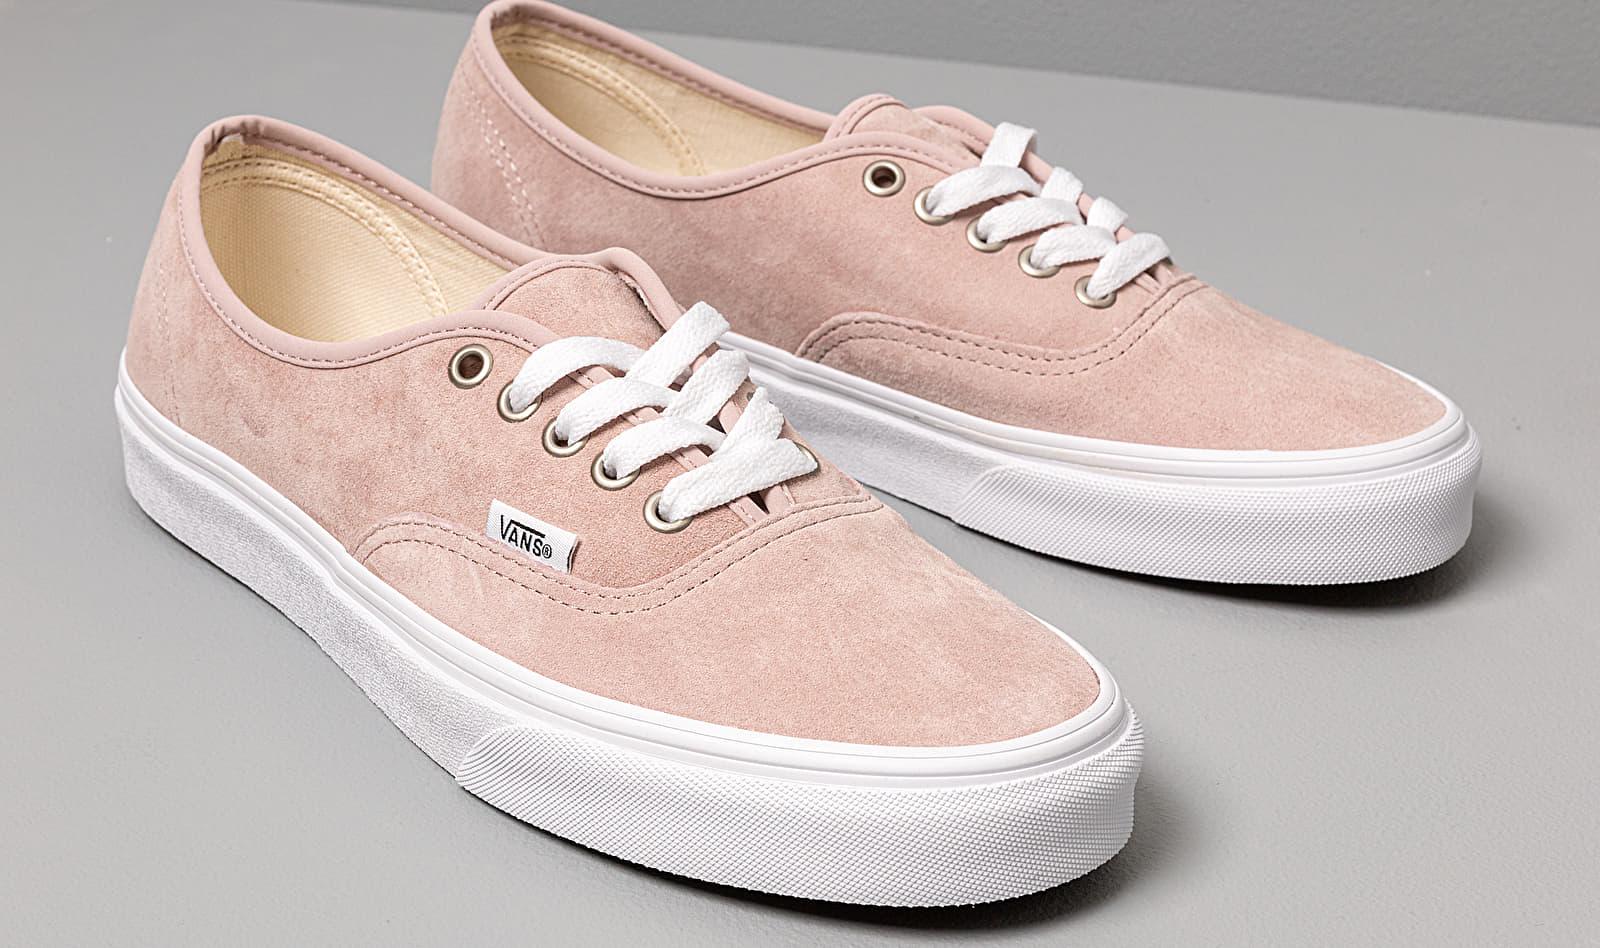 Vans Authentic Pink Suede Top Sellers, SAVE 31% - colaisteanatha.ie